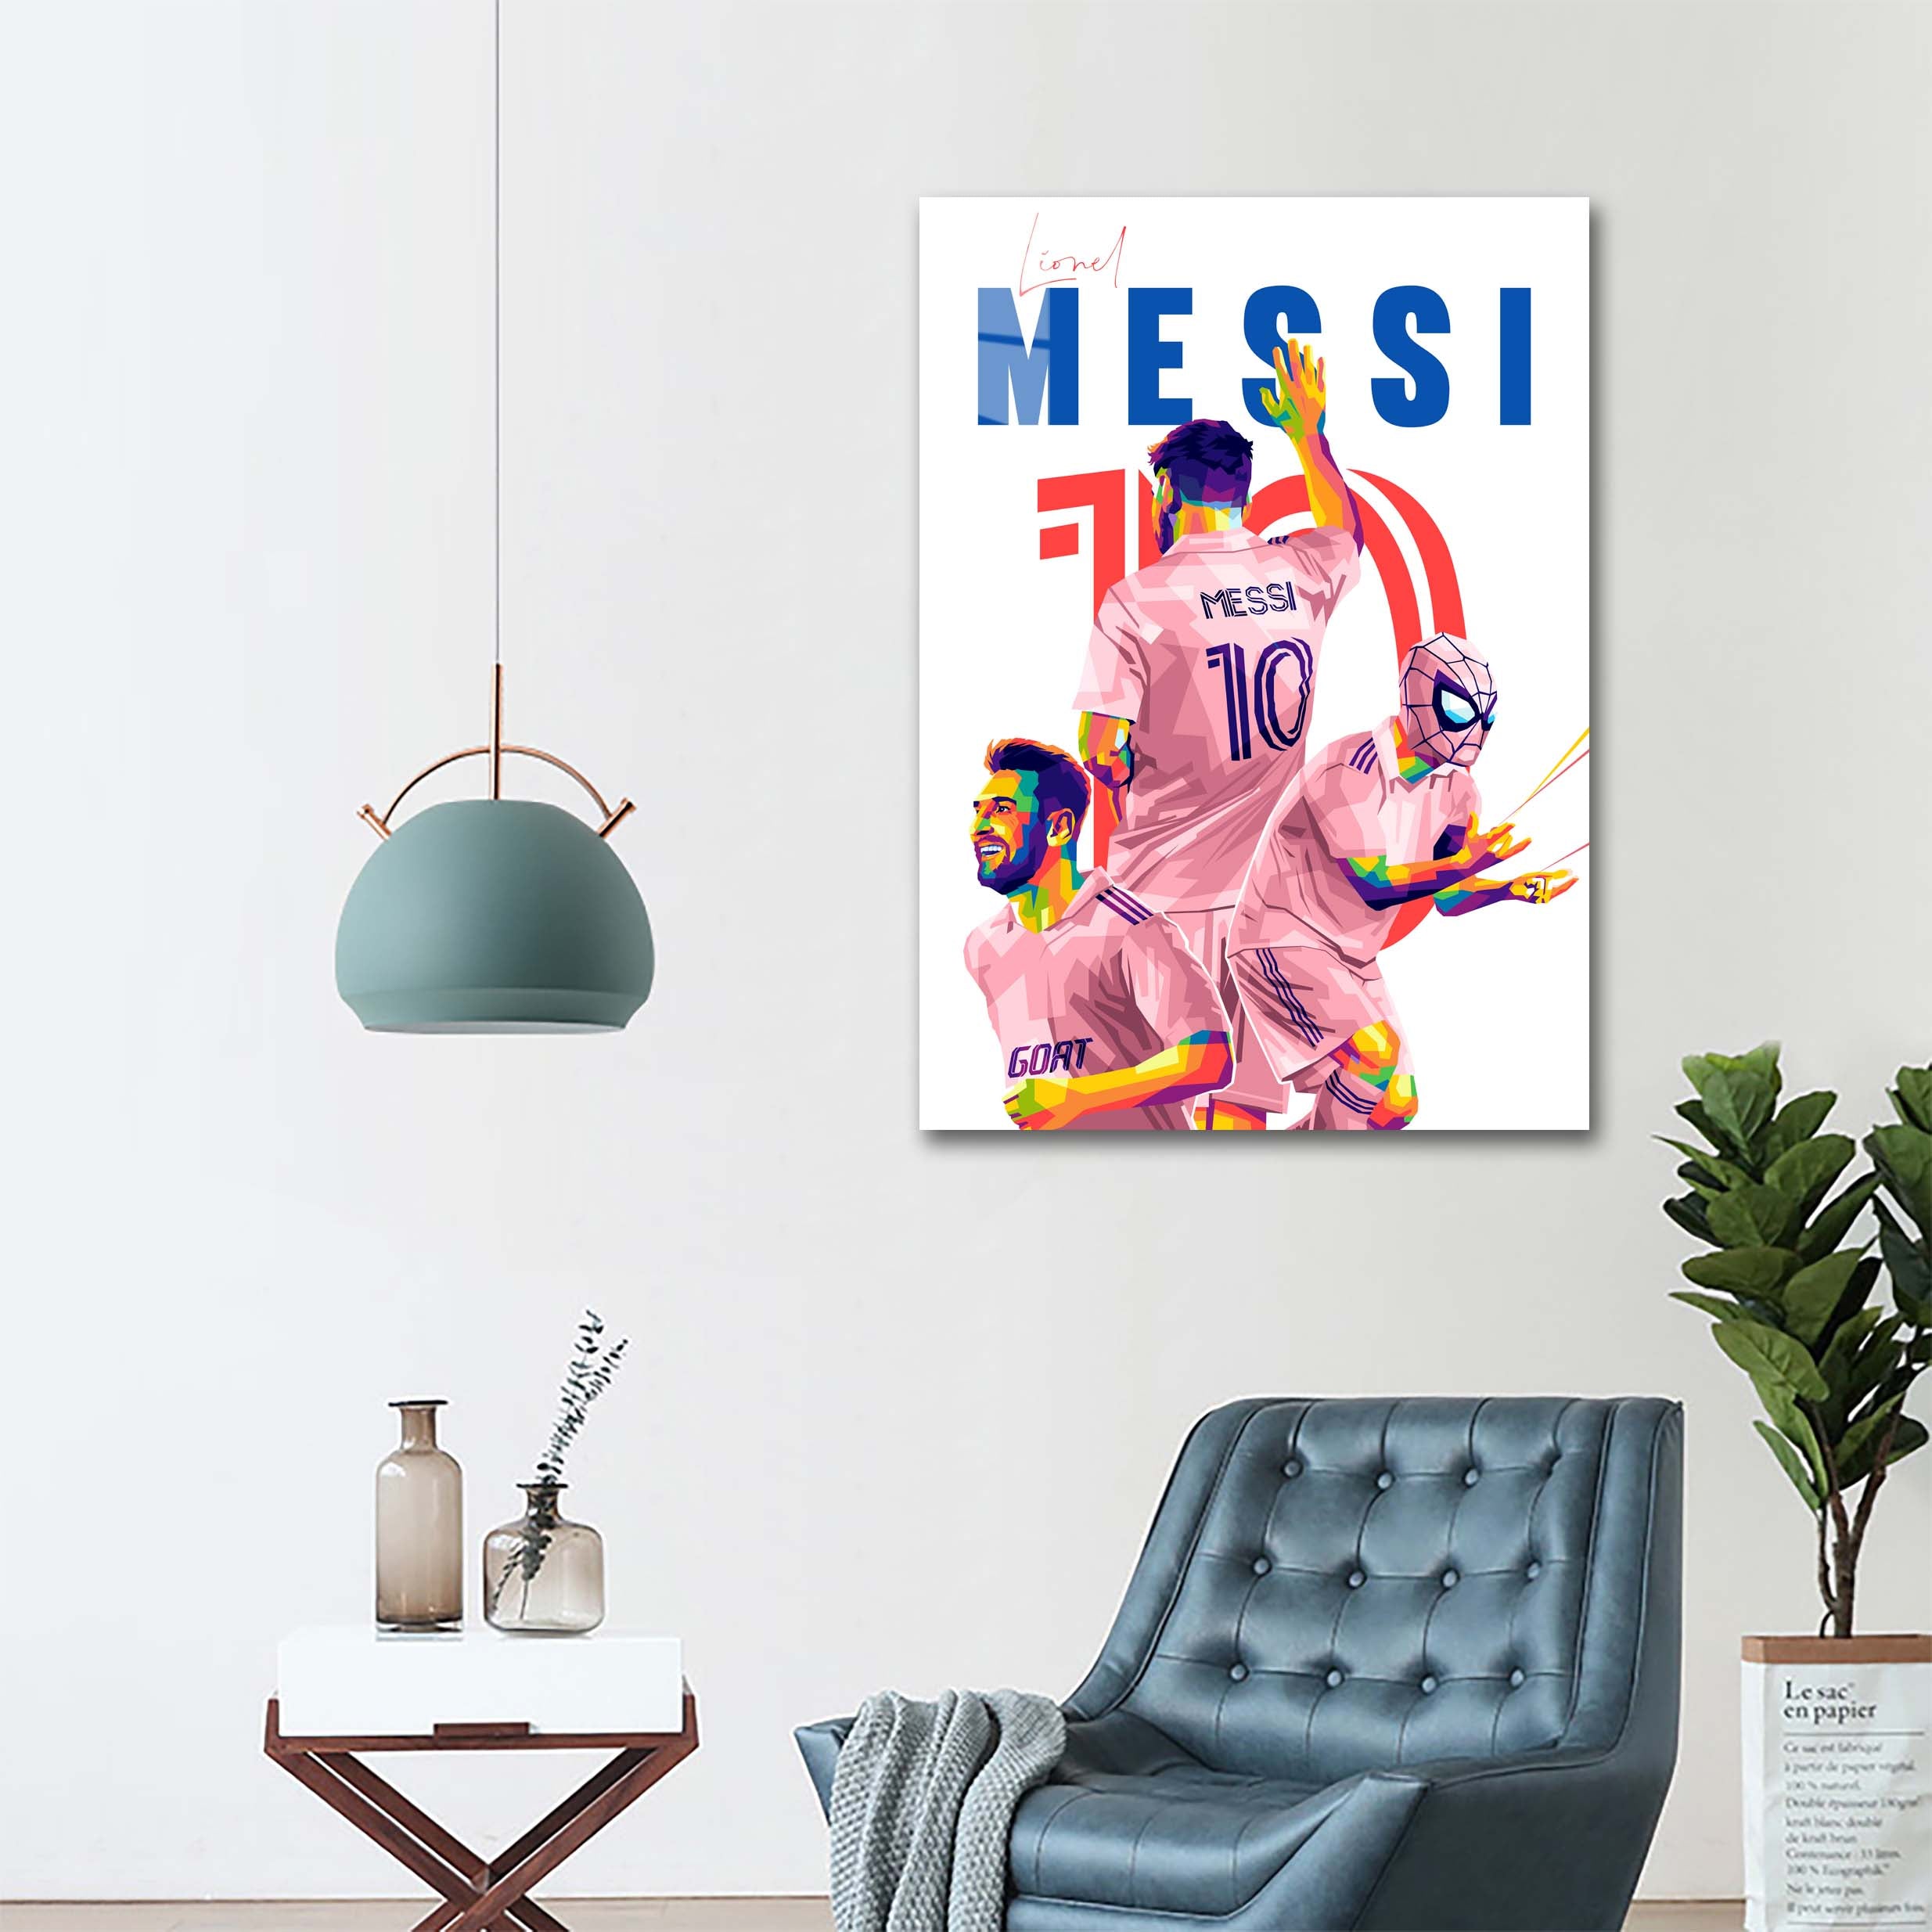 messi spider-02-Artwork by @Wpapmalang